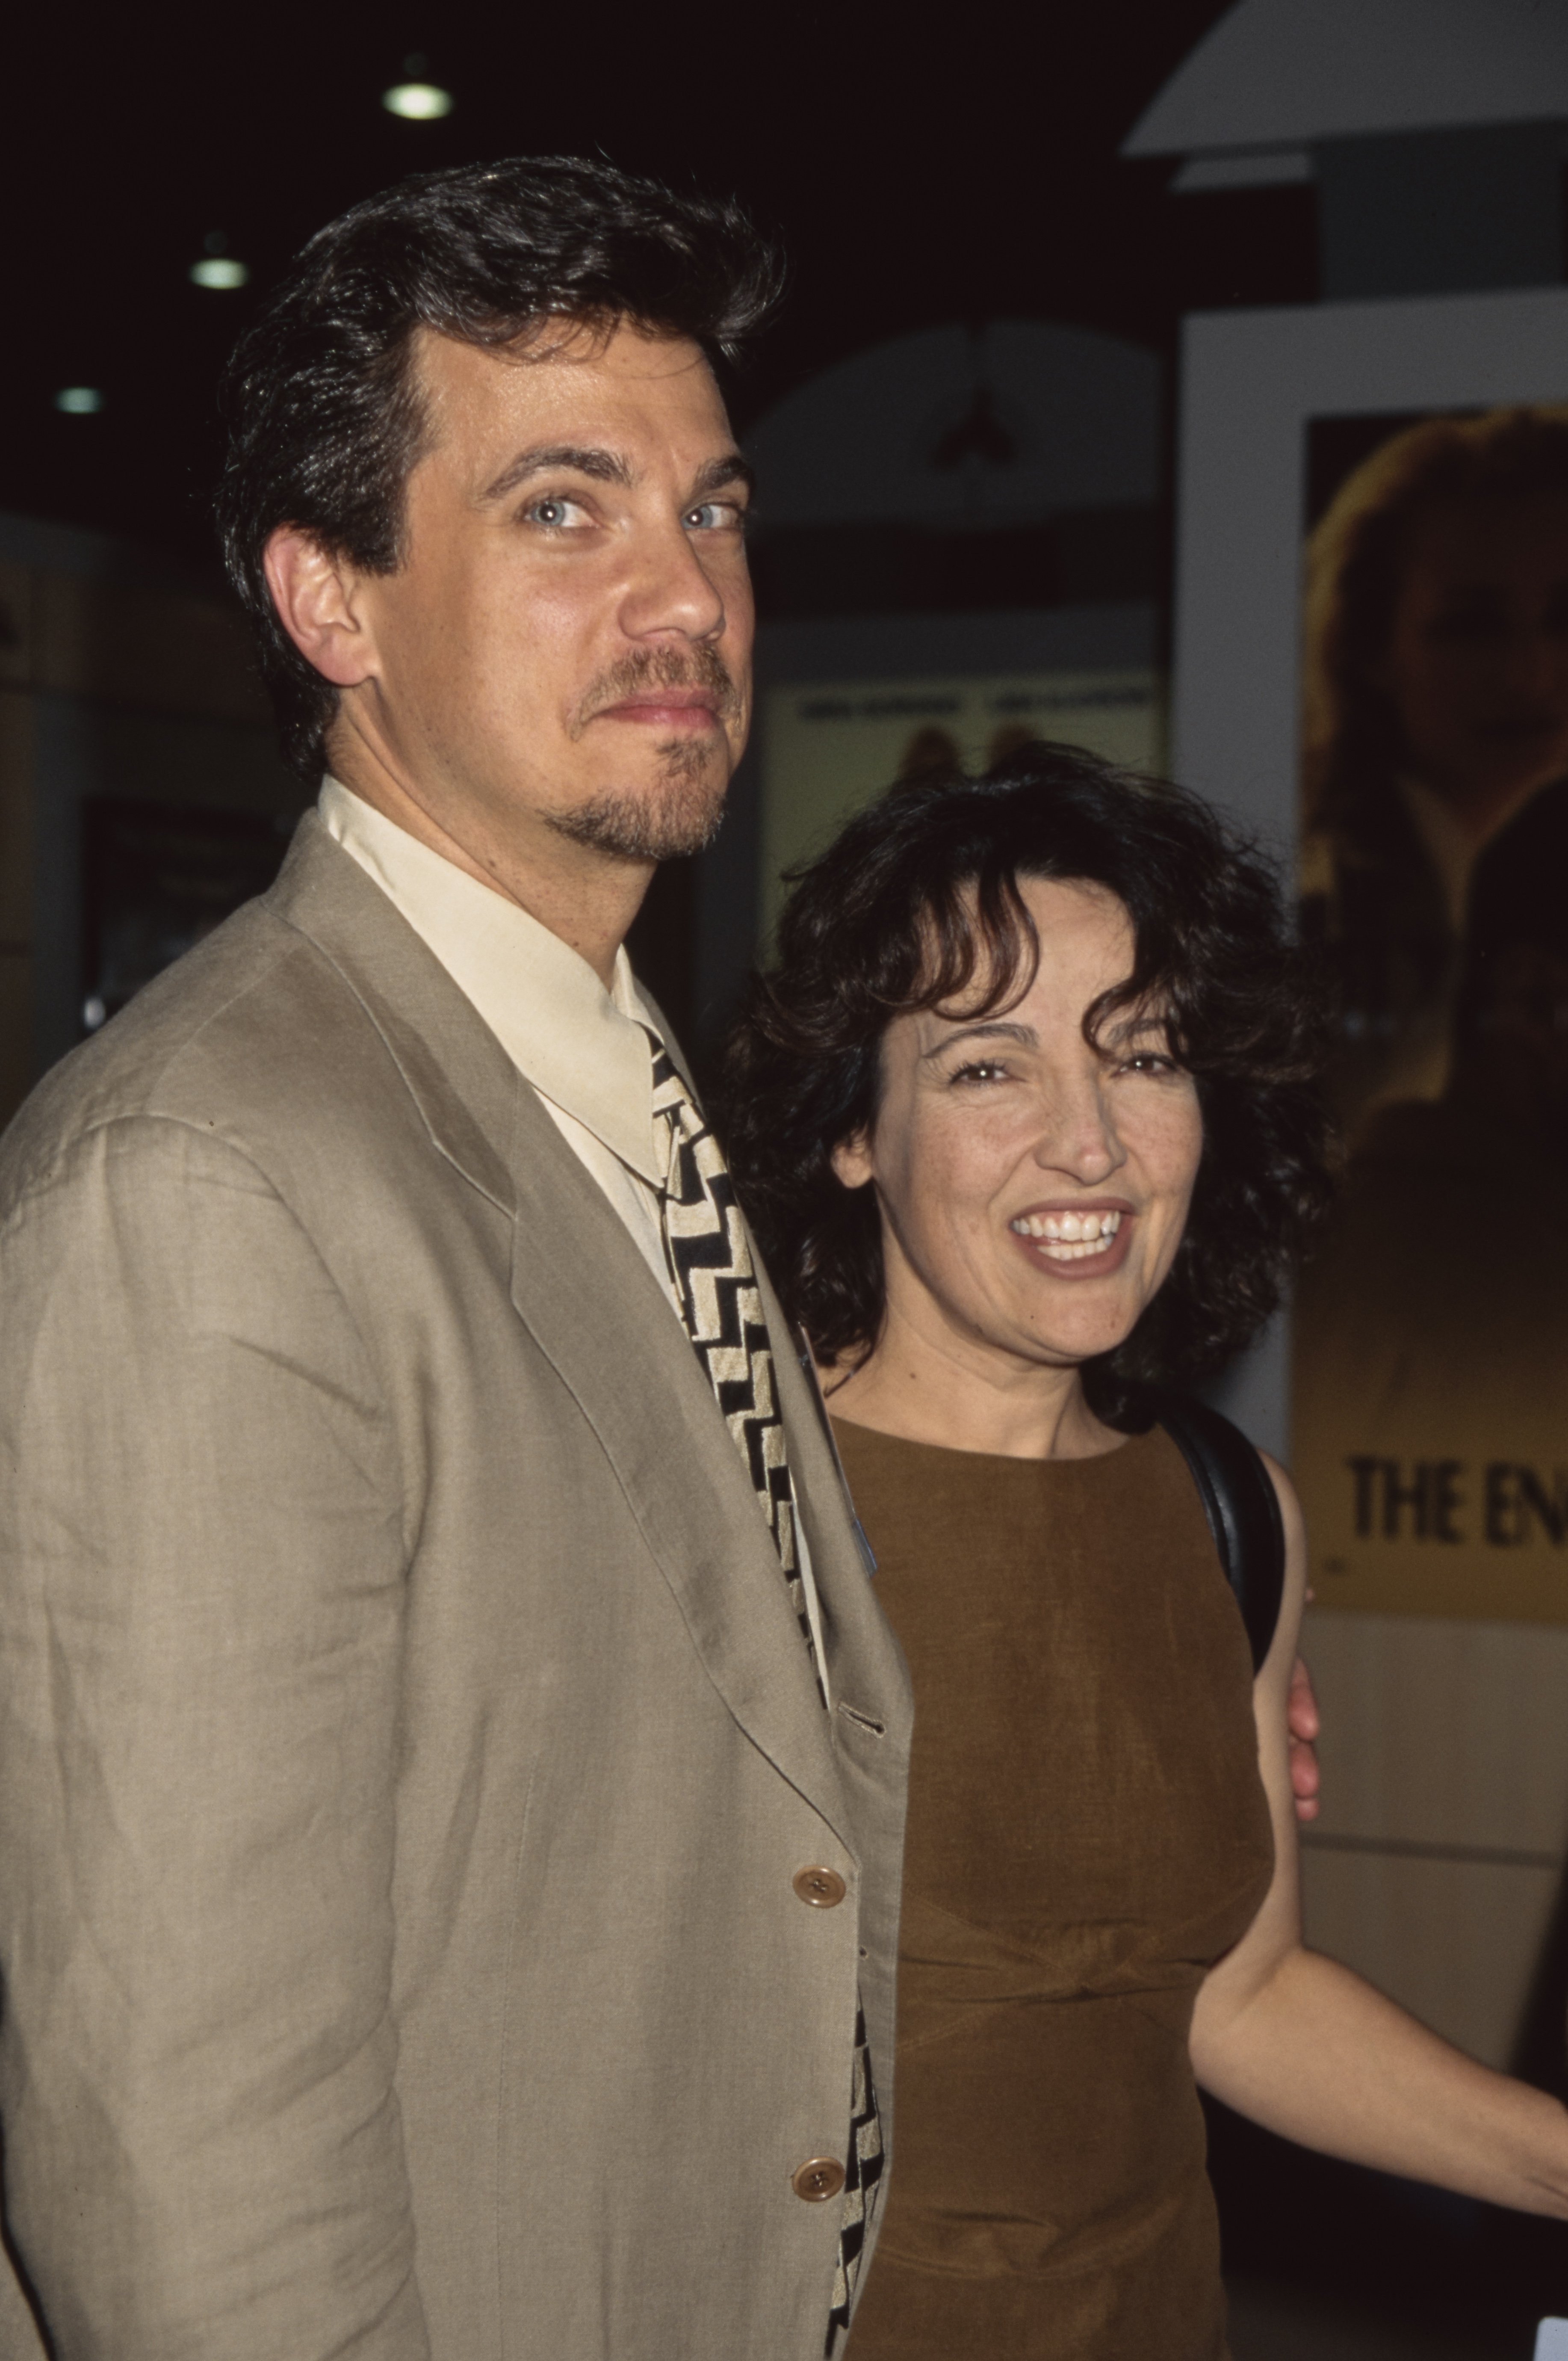 Robby Benson and his wife Karla DeVito at the Century City premiere of "Beauty and the Beast: The Enchanted Christmas" in Century City, California, on November 6, 1997 | Source: Getty Images